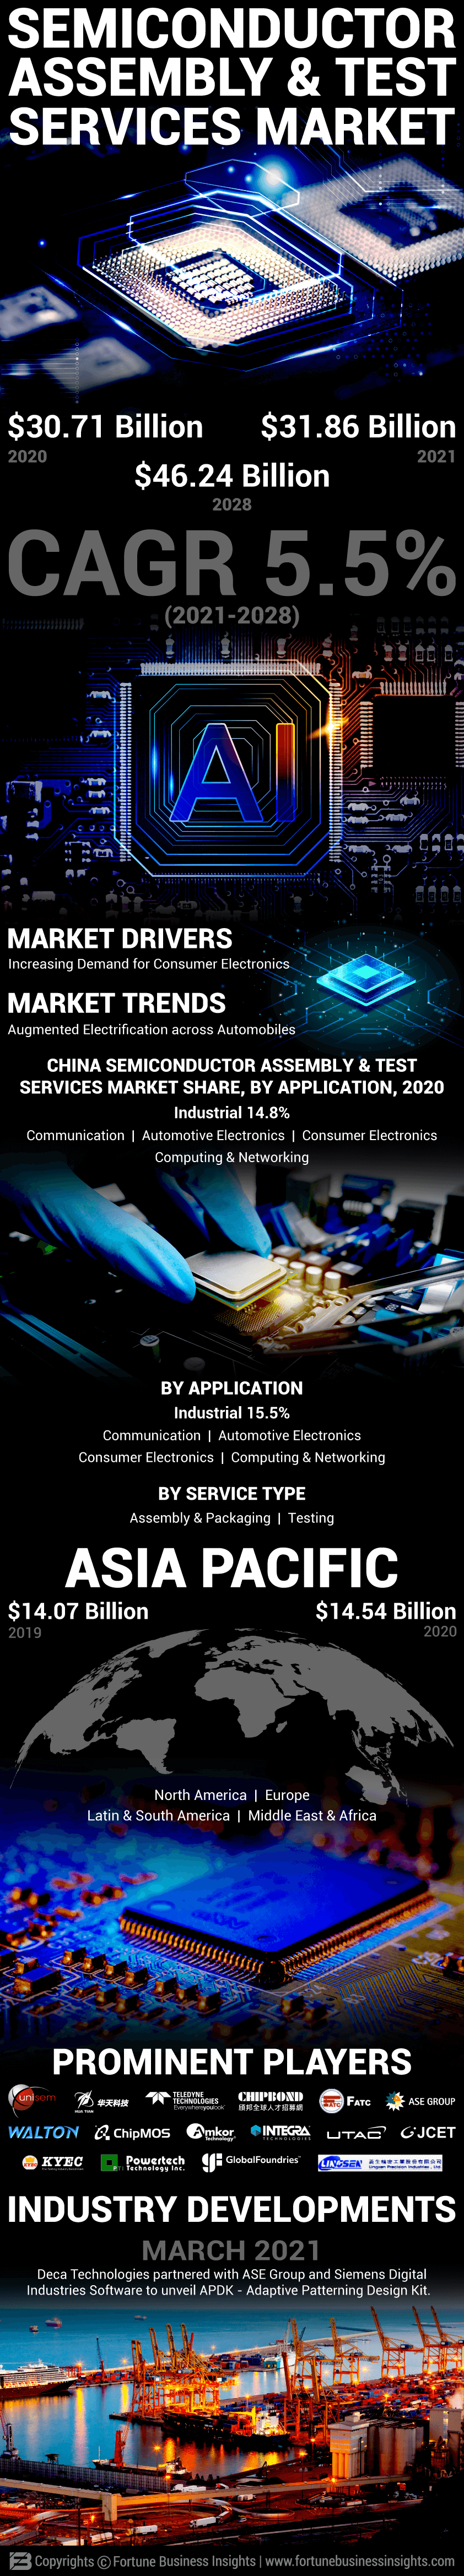 Semiconductor Assembly and Test Services (SATS) Market